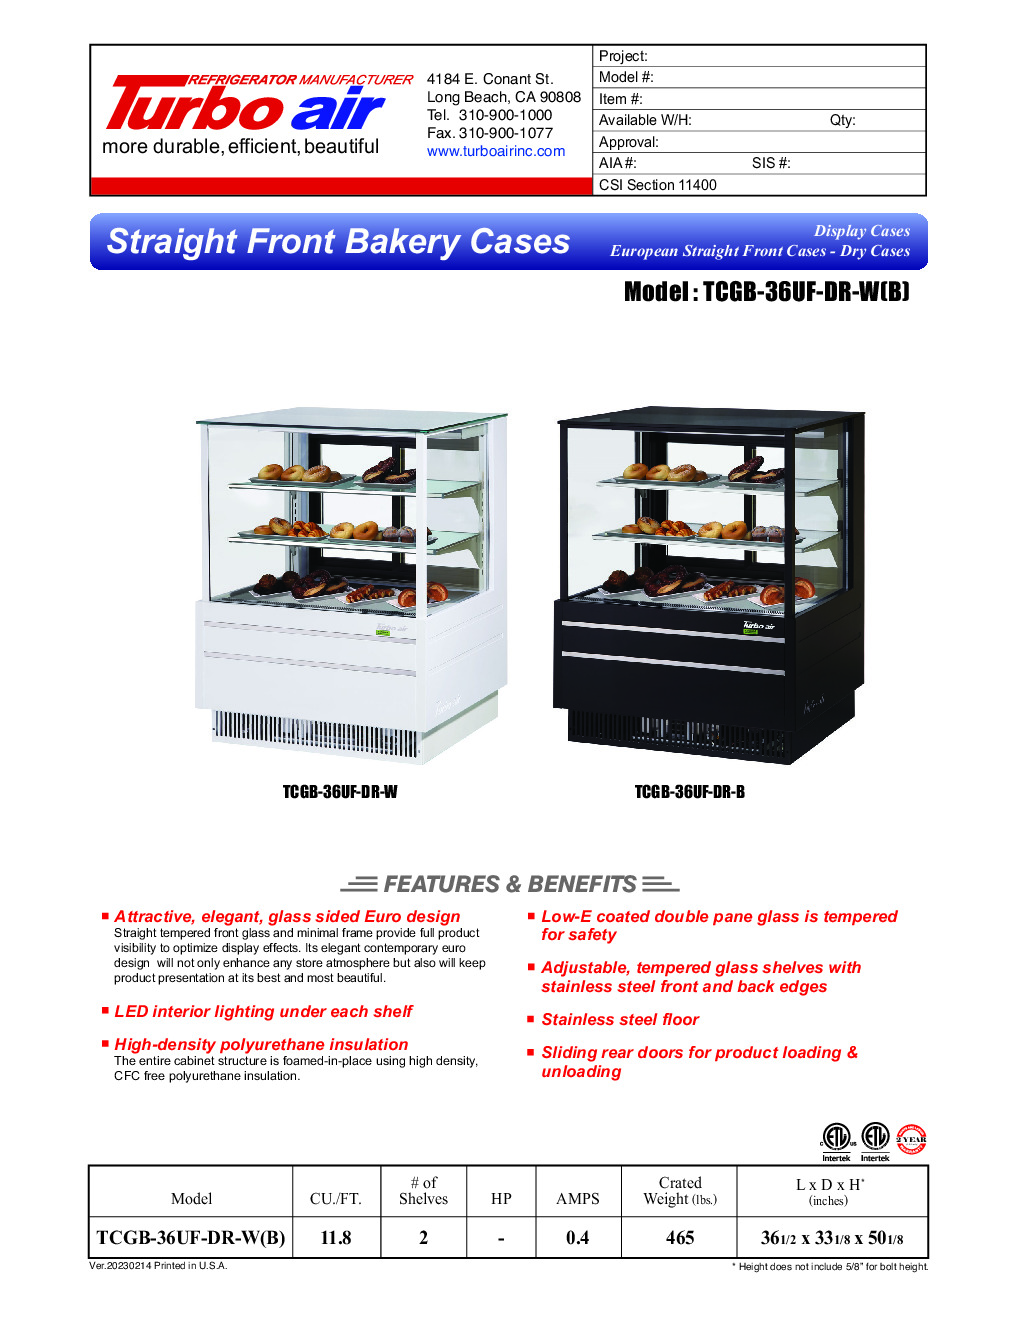 Turbo Air TCGB-36UF-DR-W(B) Non-Refrigerated Bakery Display Case